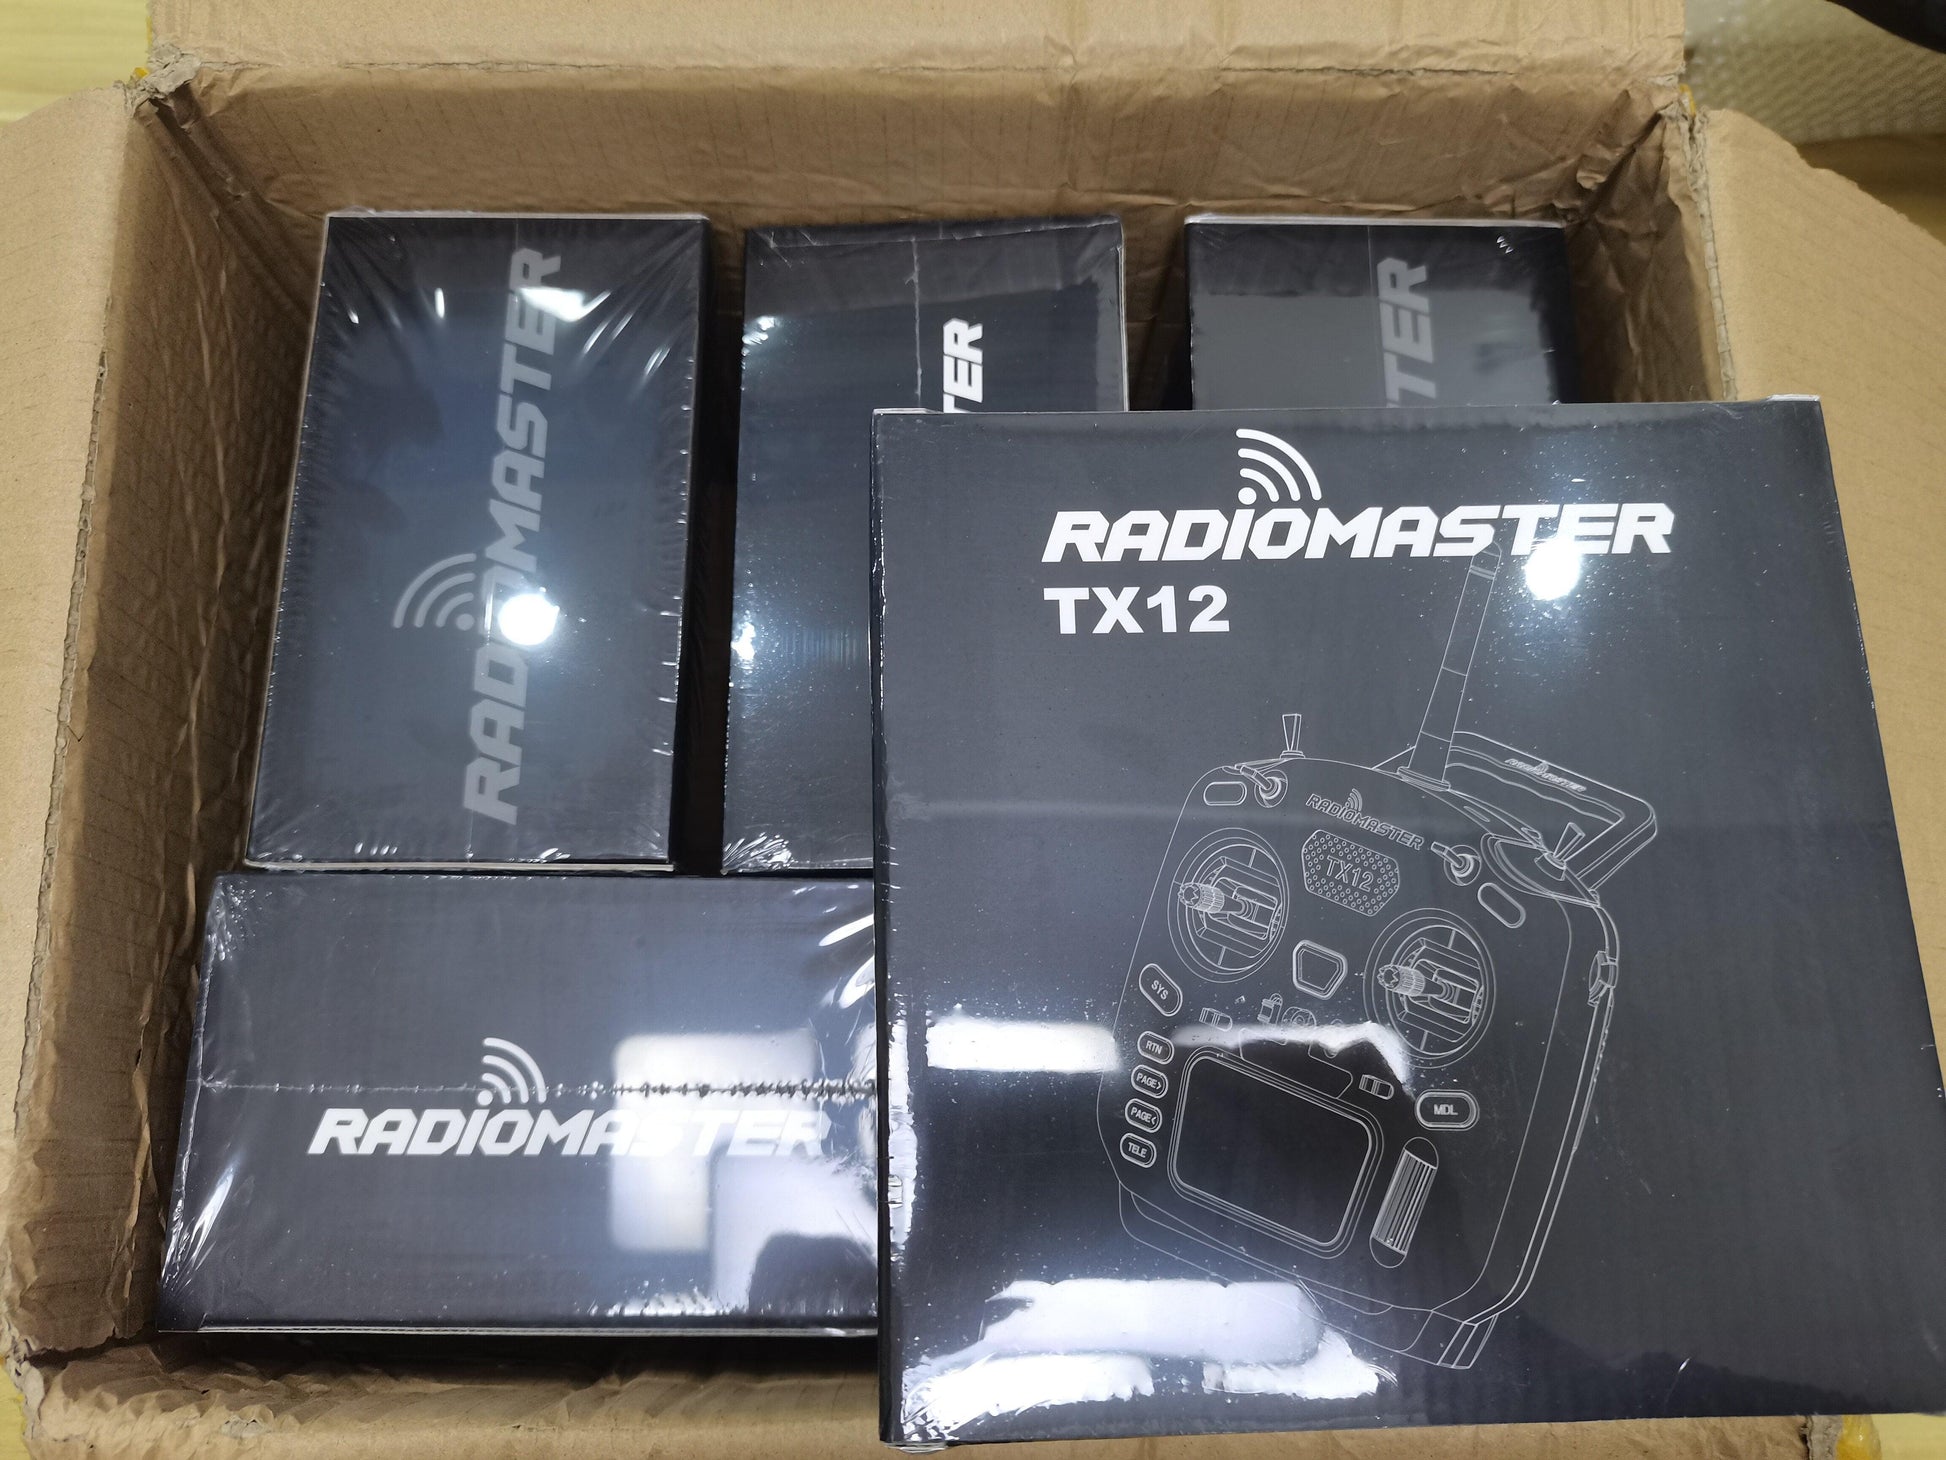 RadioMaster TX12 MKII 16ch Hall Gimbals Support OPENTX and EDGETX Remote Control Transmitter - RCDrone